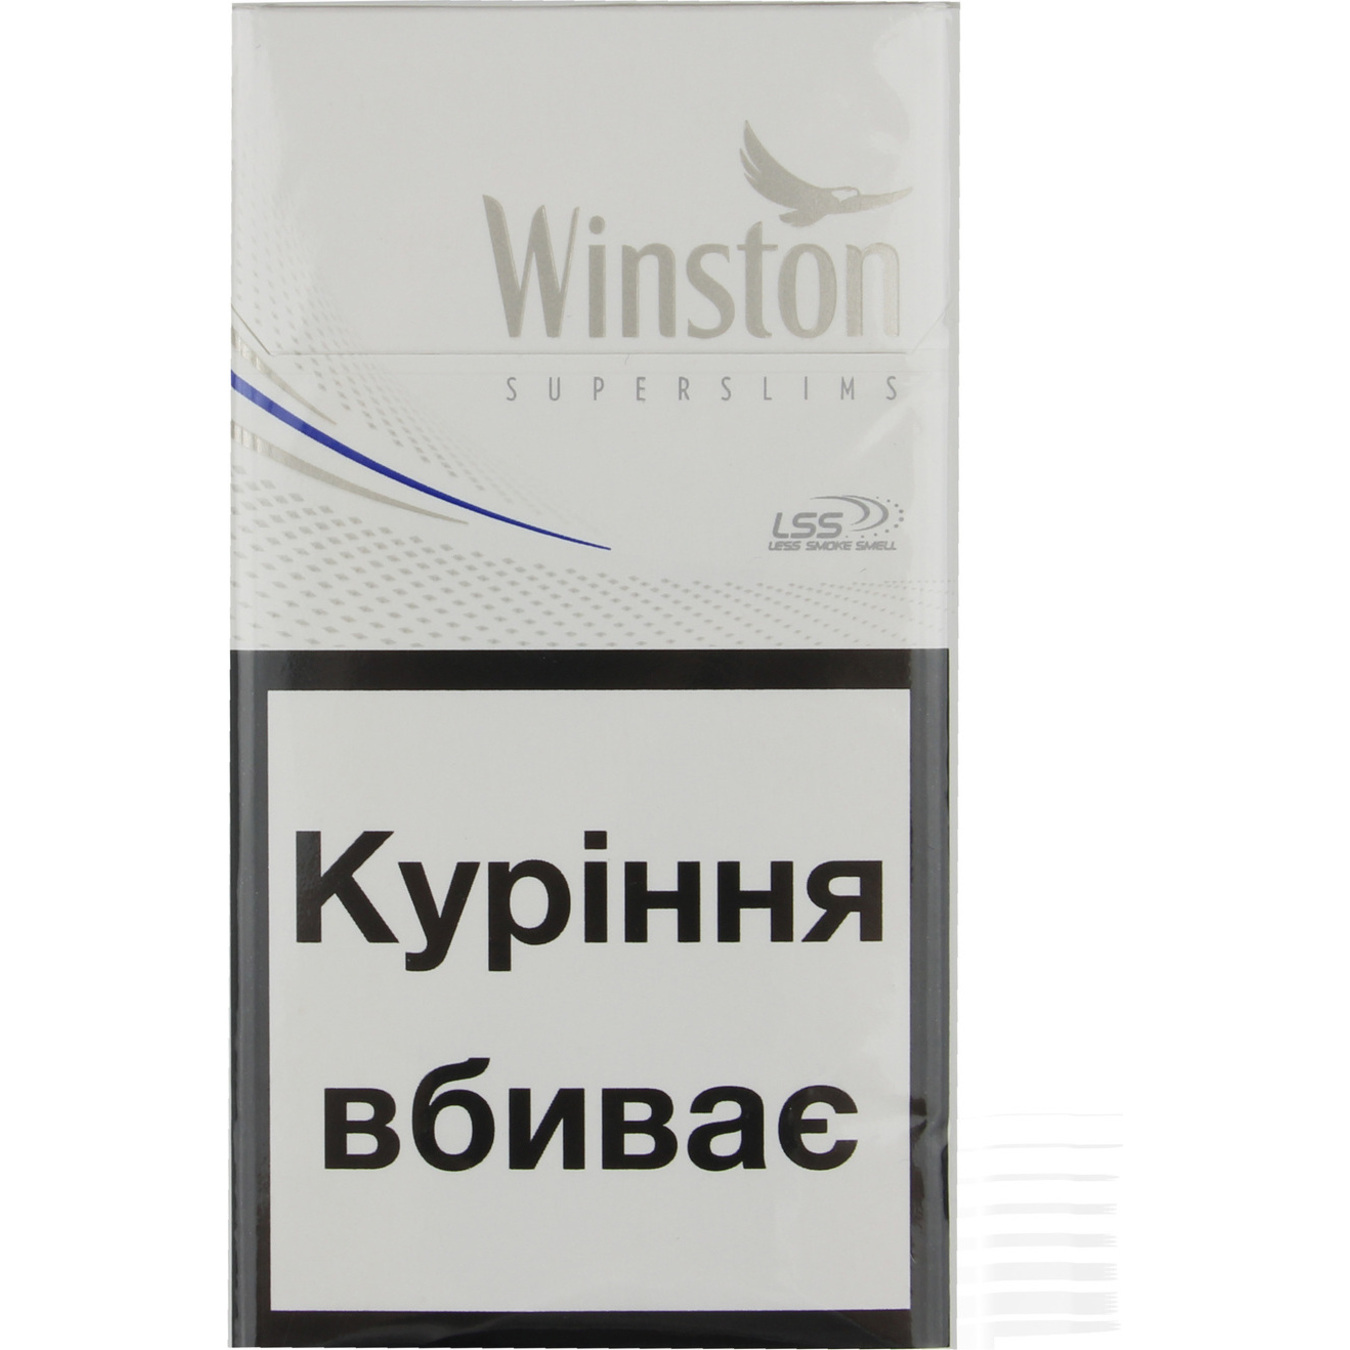 Winston Cigarettes Silver Super Slims 20 pcs (the price is indicated without excise tax)